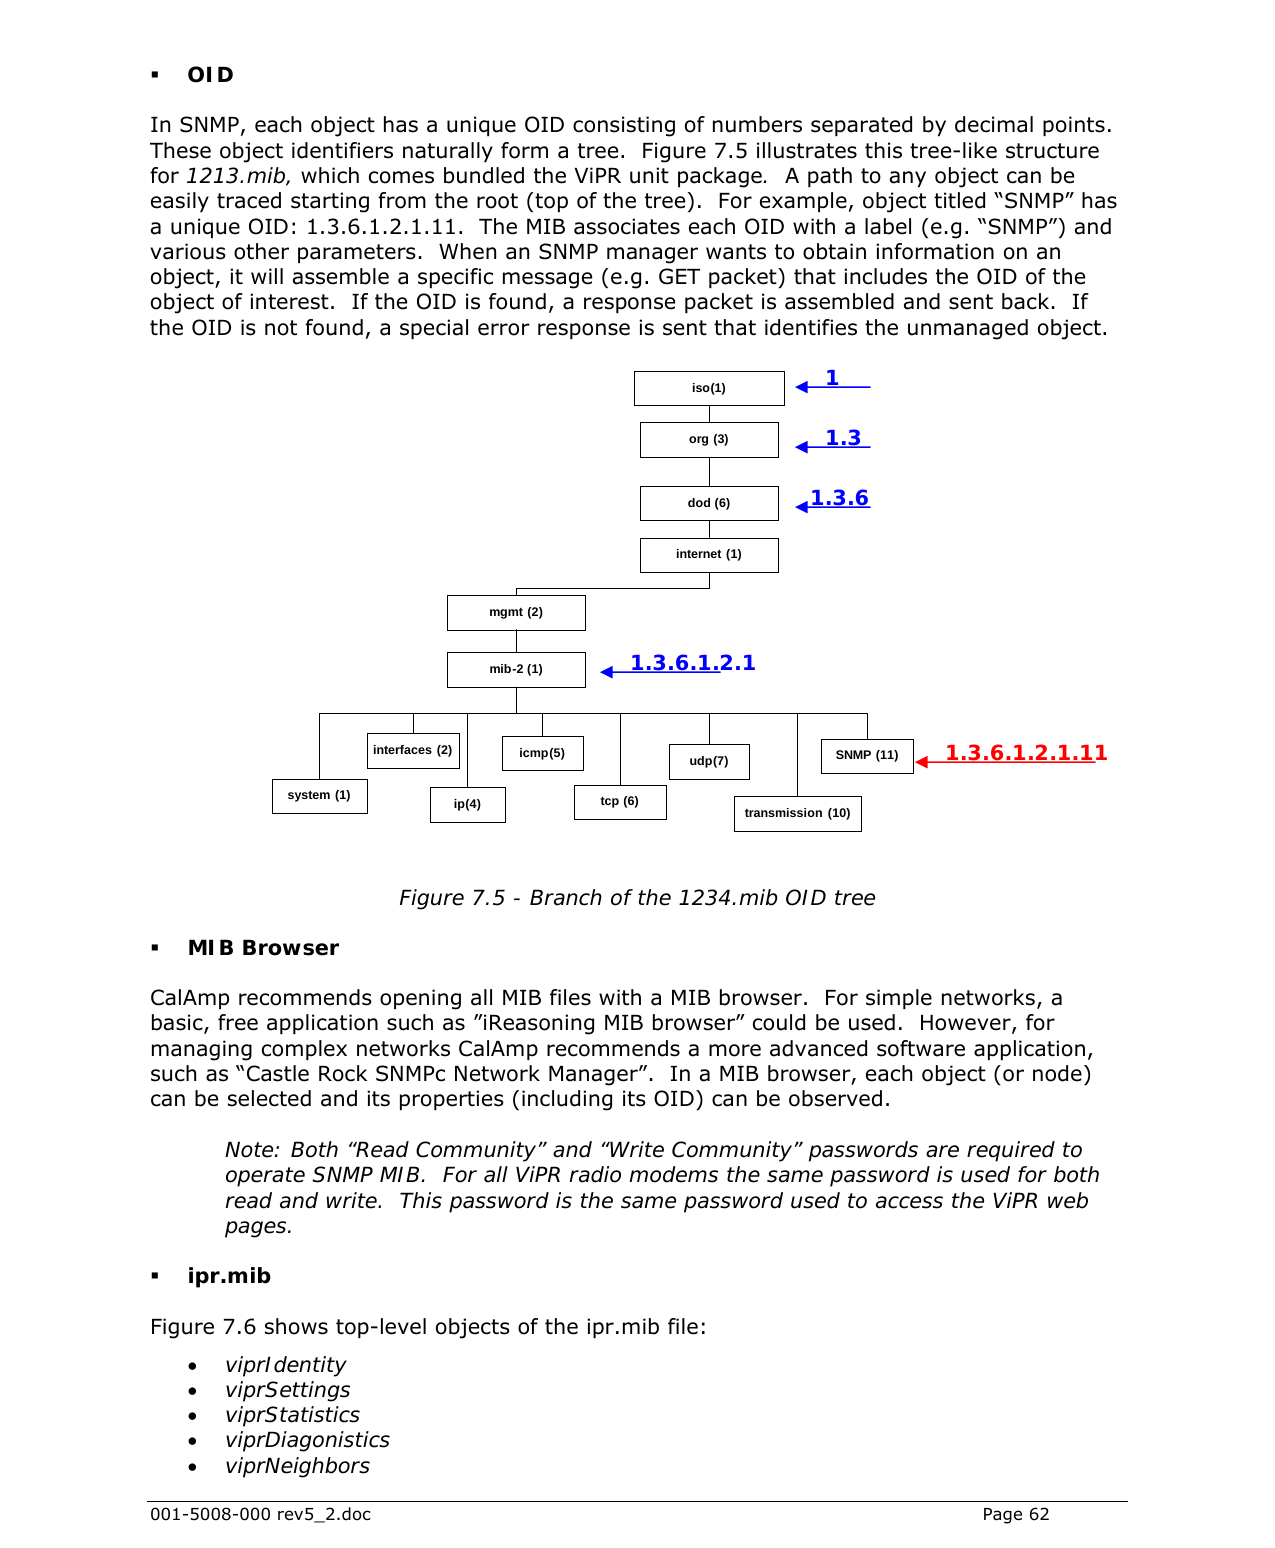  001-5008-000 rev5_2.doc    Page 62  OID In SNMP, each object has a unique OID consisting of numbers separated by decimal points.  These object identifiers naturally form a tree.  Figure 7.5 illustrates this tree-like structure for 1213.mib, which comes bundled the ViPR unit package.  A path to any object can be easily traced starting from the root (top of the tree).  For example, object titled “SNMP” has a unique OID: 1.3.6.1.2.1.11.  The MIB associates each OID with a label (e.g. “SNMP”) and various other parameters.  When an SNMP manager wants to obtain information on an object, it will assemble a specific message (e.g. GET packet) that includes the OID of the object of interest.  If the OID is found, a response packet is assembled and sent back.  If the OID is not found, a special error response is sent that identifies the unmanaged object.   Figure 7.5 - Branch of the 1234.mib OID tree   MIB Browser CalAmp recommends opening all MIB files with a MIB browser.  For simple networks, a basic, free application such as ”iReasoning MIB browser” could be used.  However, for managing complex networks CalAmp recommends a more advanced software application, such as “Castle Rock SNMPc Network Manager”.  In a MIB browser, each object (or node) can be selected and its properties (including its OID) can be observed.  Note: Both “Read Community” and “Write Community” passwords are required to operate SNMP MIB.  For all ViPR radio modems the same password is used for both read and write.  This password is the same password used to access the ViPR web pages.  ipr.mib  Figure 7.6 shows top-level objects of the ipr.mib file: • viprIdentity • viprSettings • viprStatistics • viprDiagonistics • viprNeighbors org (3)iso(1)ip(4)icmp(5) SNMP (11)udp(7)system (1)interfaces (2)dod (6)internet (1)mgmt (2)mib-2 (1)tcp (6) transmission (10)1.3.6.1.2.1 1.3.6.1.2.1.11 1 1.3.6 1.3 